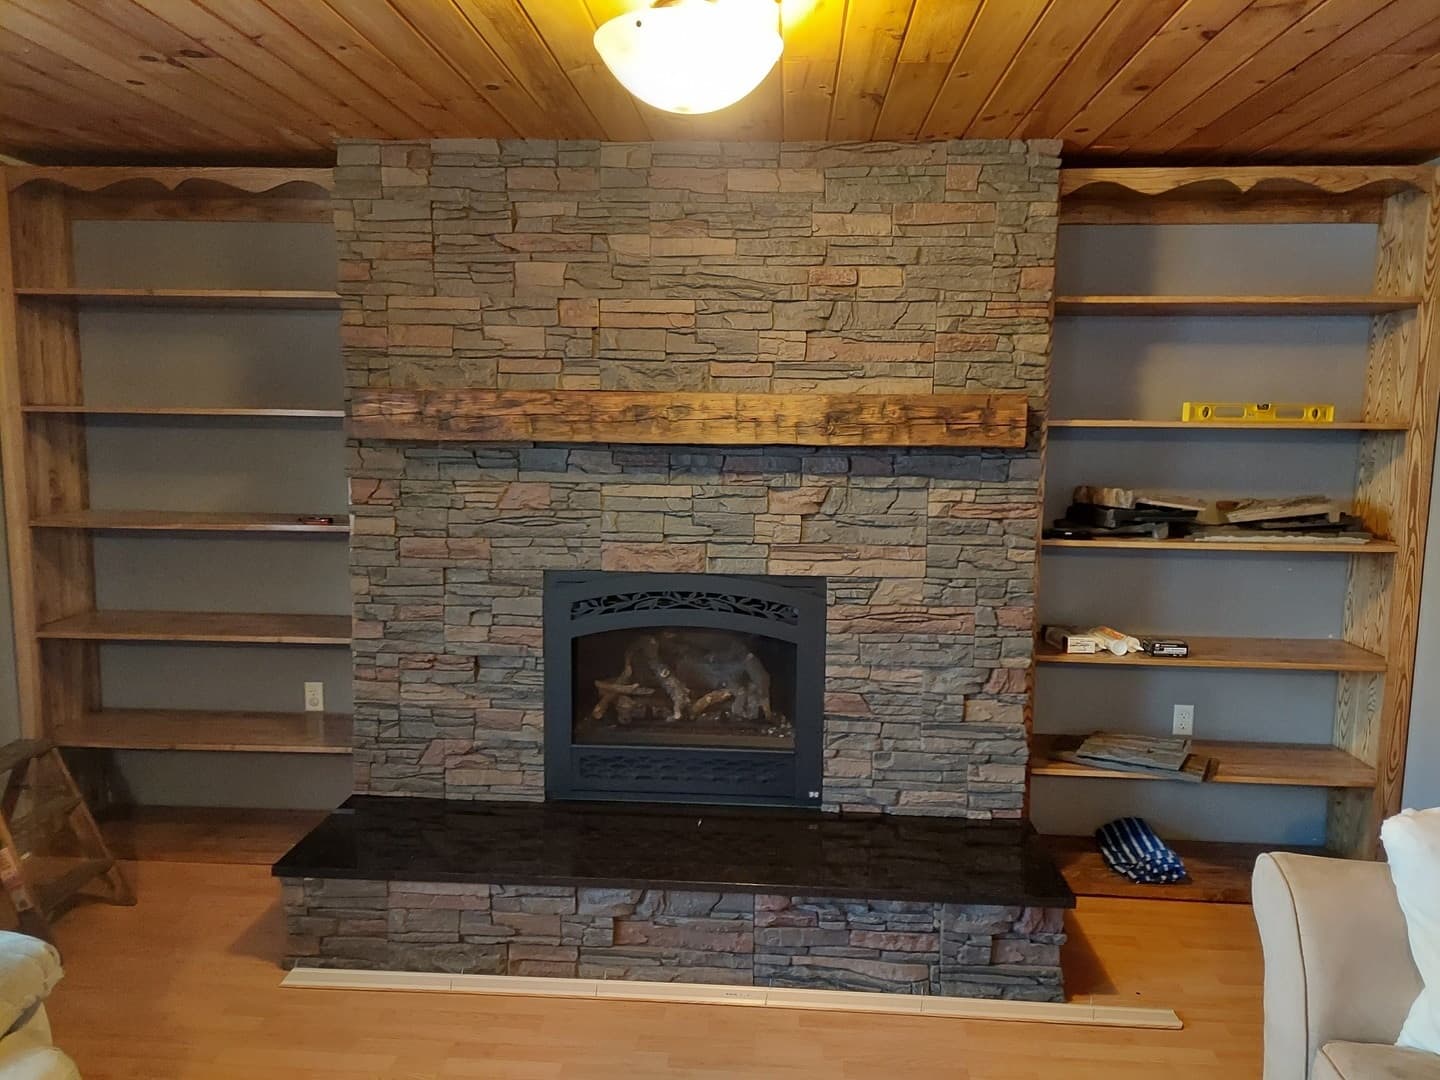 A new fireplace and bookcase with Stratford faux stone.